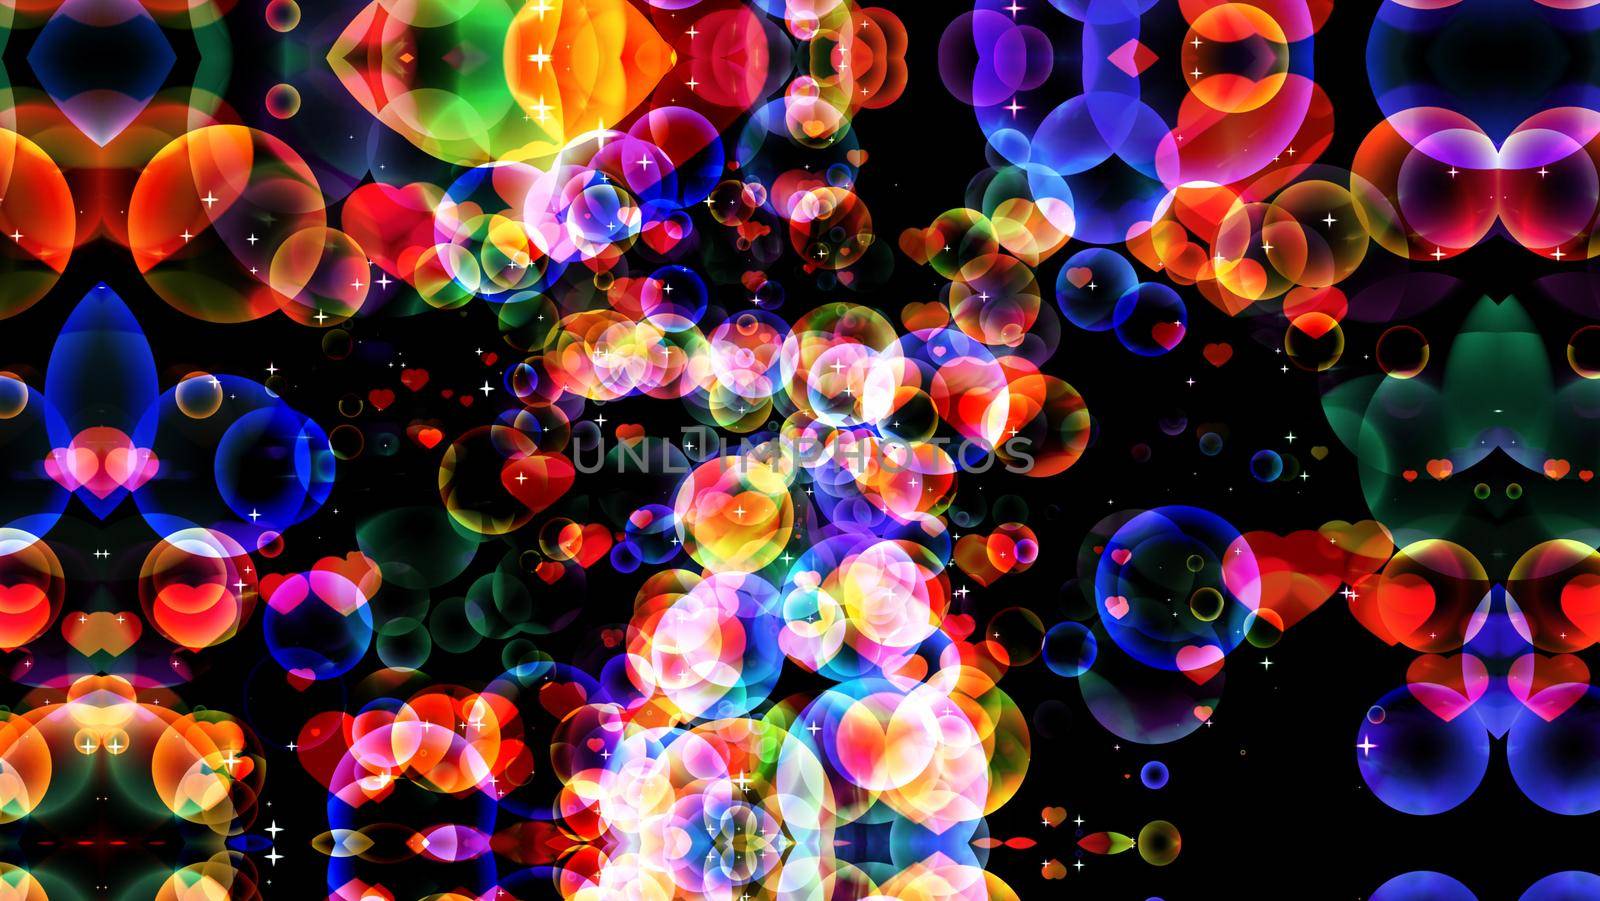 reflection dark abstract dimension rainbow bubbles with dancing hearts floating on black screen with white star theme valentine day and love concept